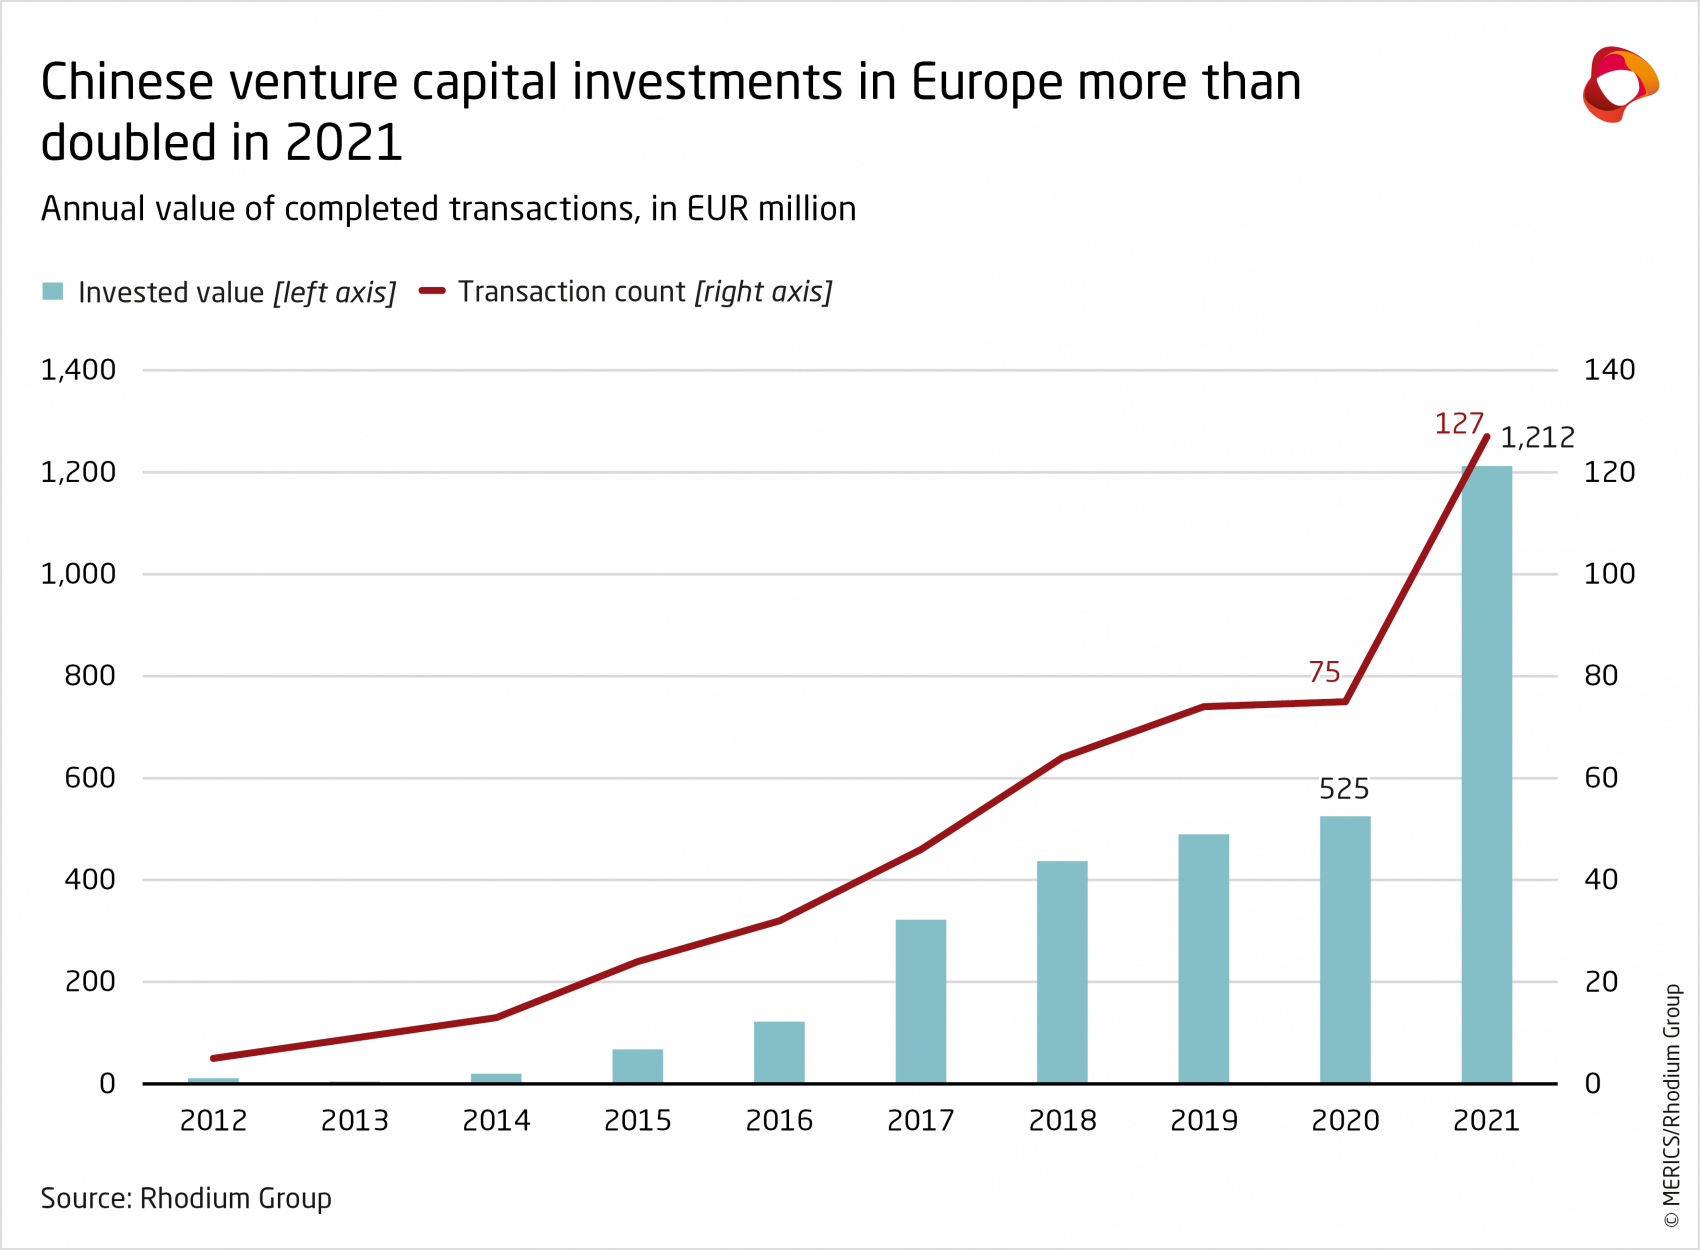 Chinese venture capital investments in Europe more than doubled in 2021